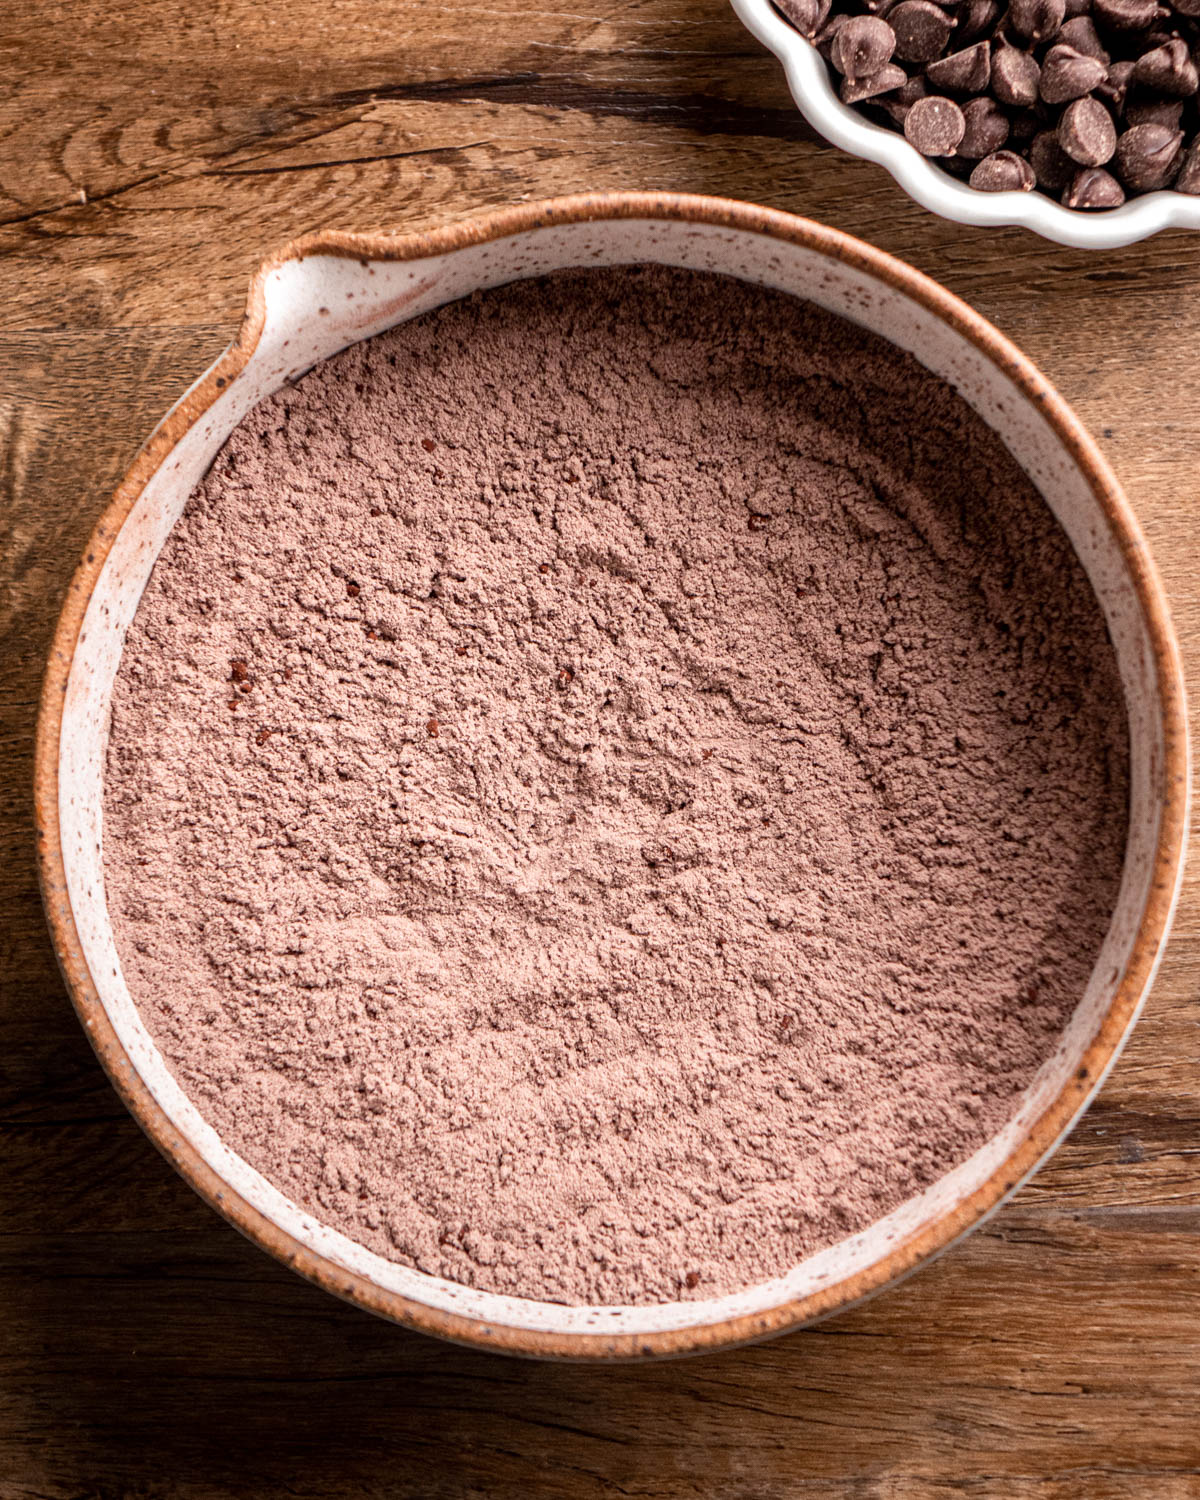 flour, cocoa powder, baking powder and salt whisked together in a bowl